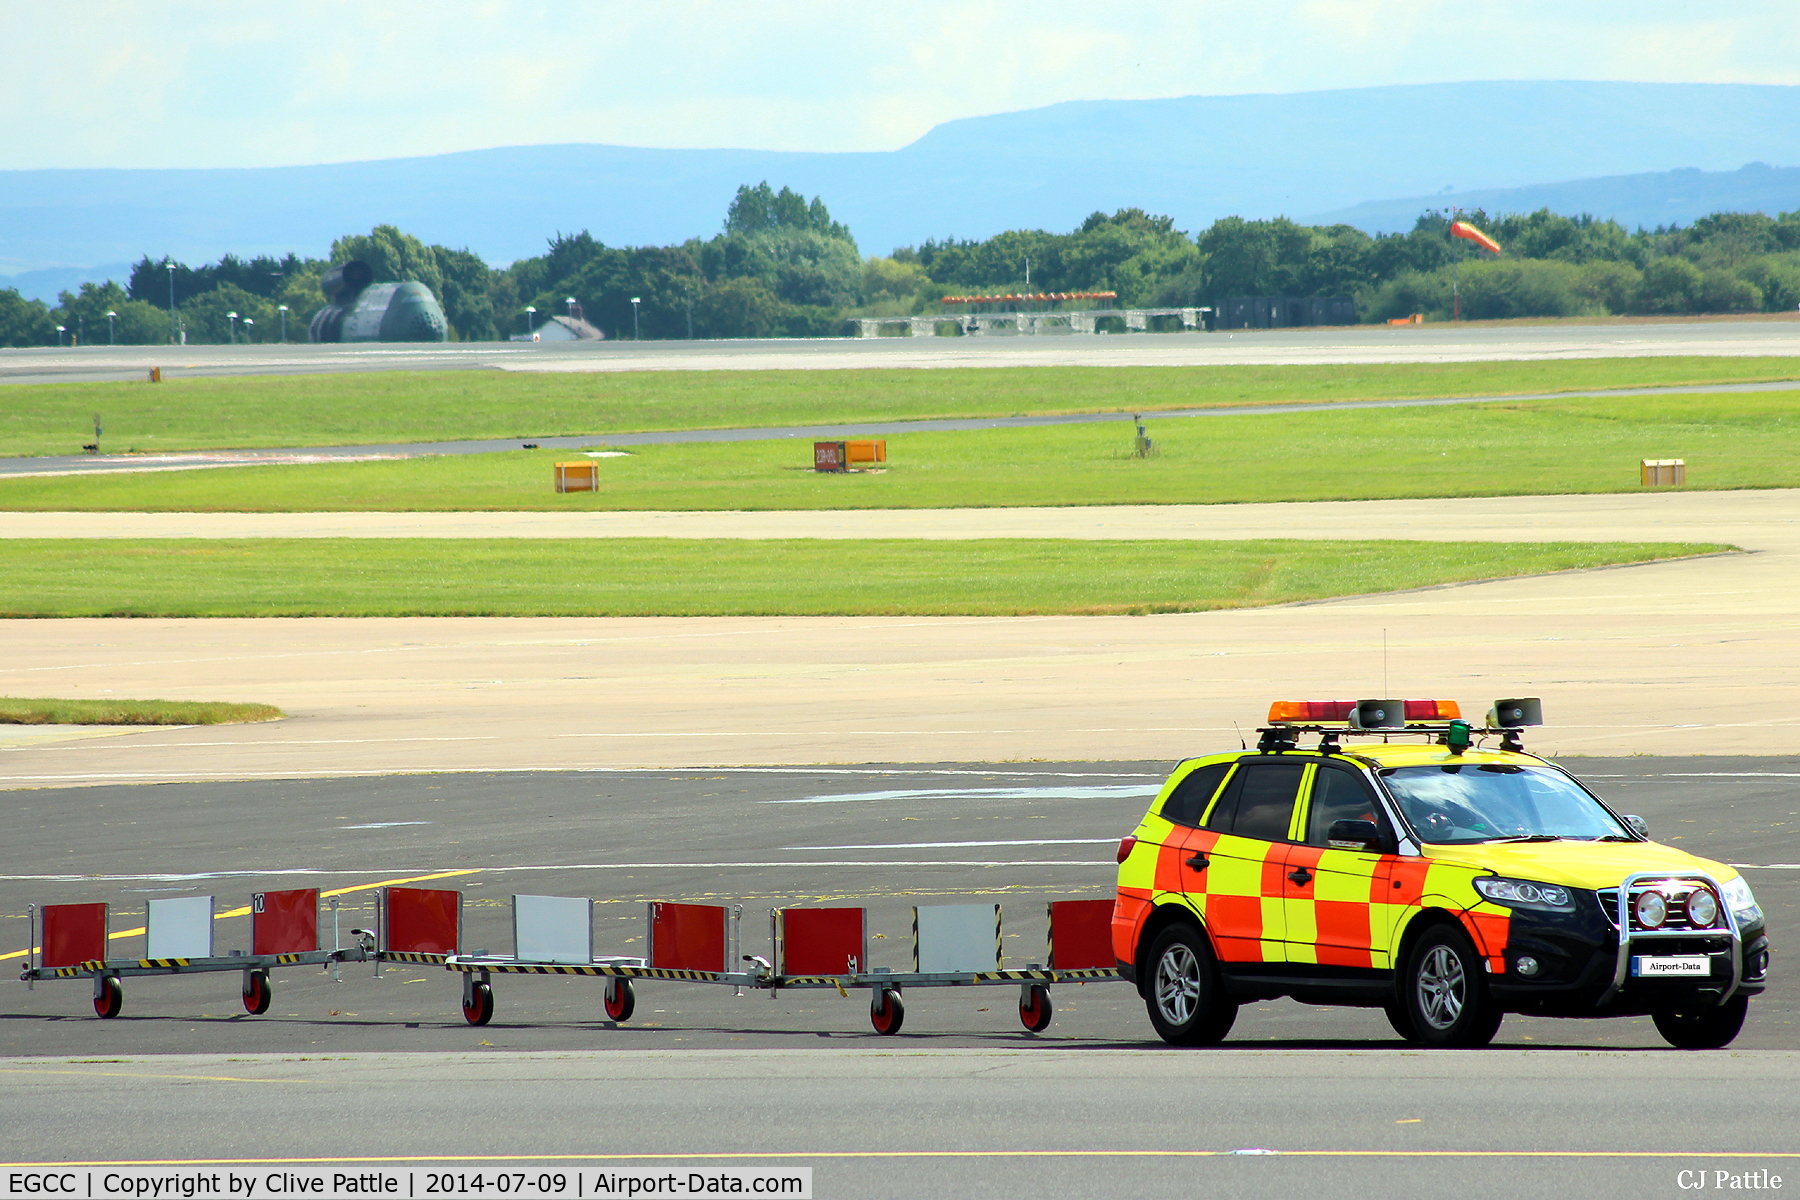 Manchester Airport, Manchester, England United Kingdom (EGCC) - Airfield Operations Vehicle at Manchester EGCC